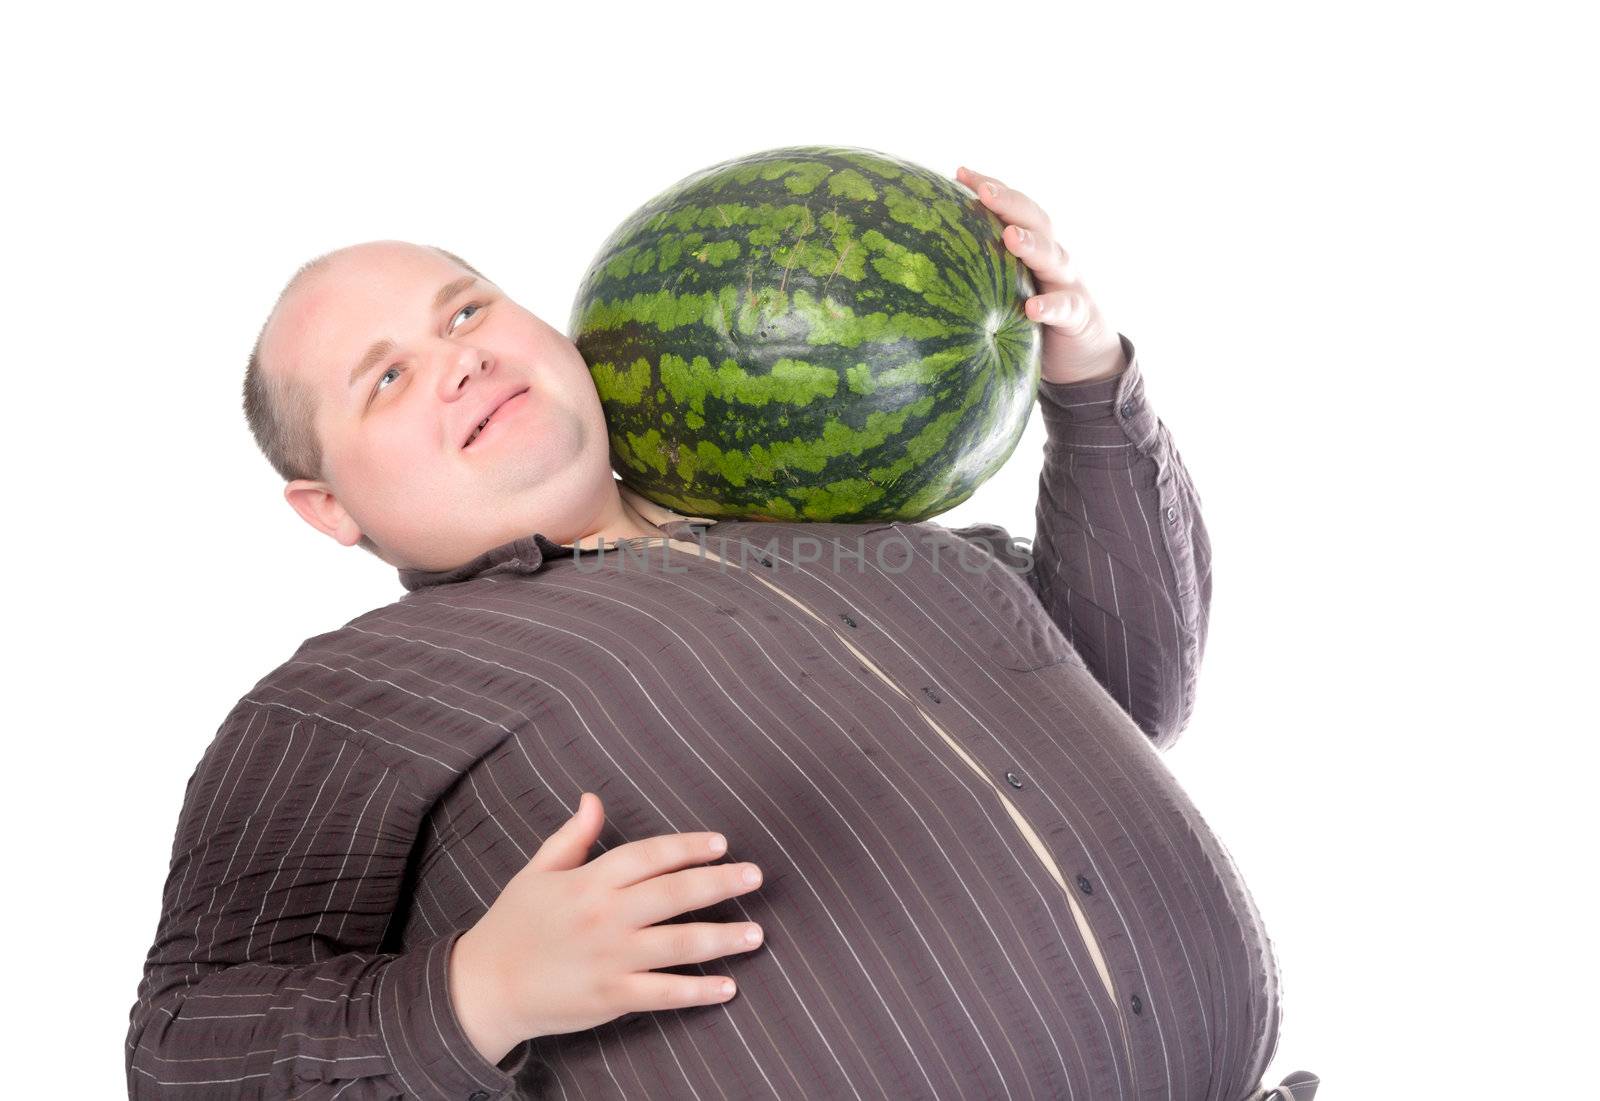 Obese man carrying a watermelon on his shoulder and rubbing his belly with a gleeful look of anticipation as he contemplates the delights of devouring it